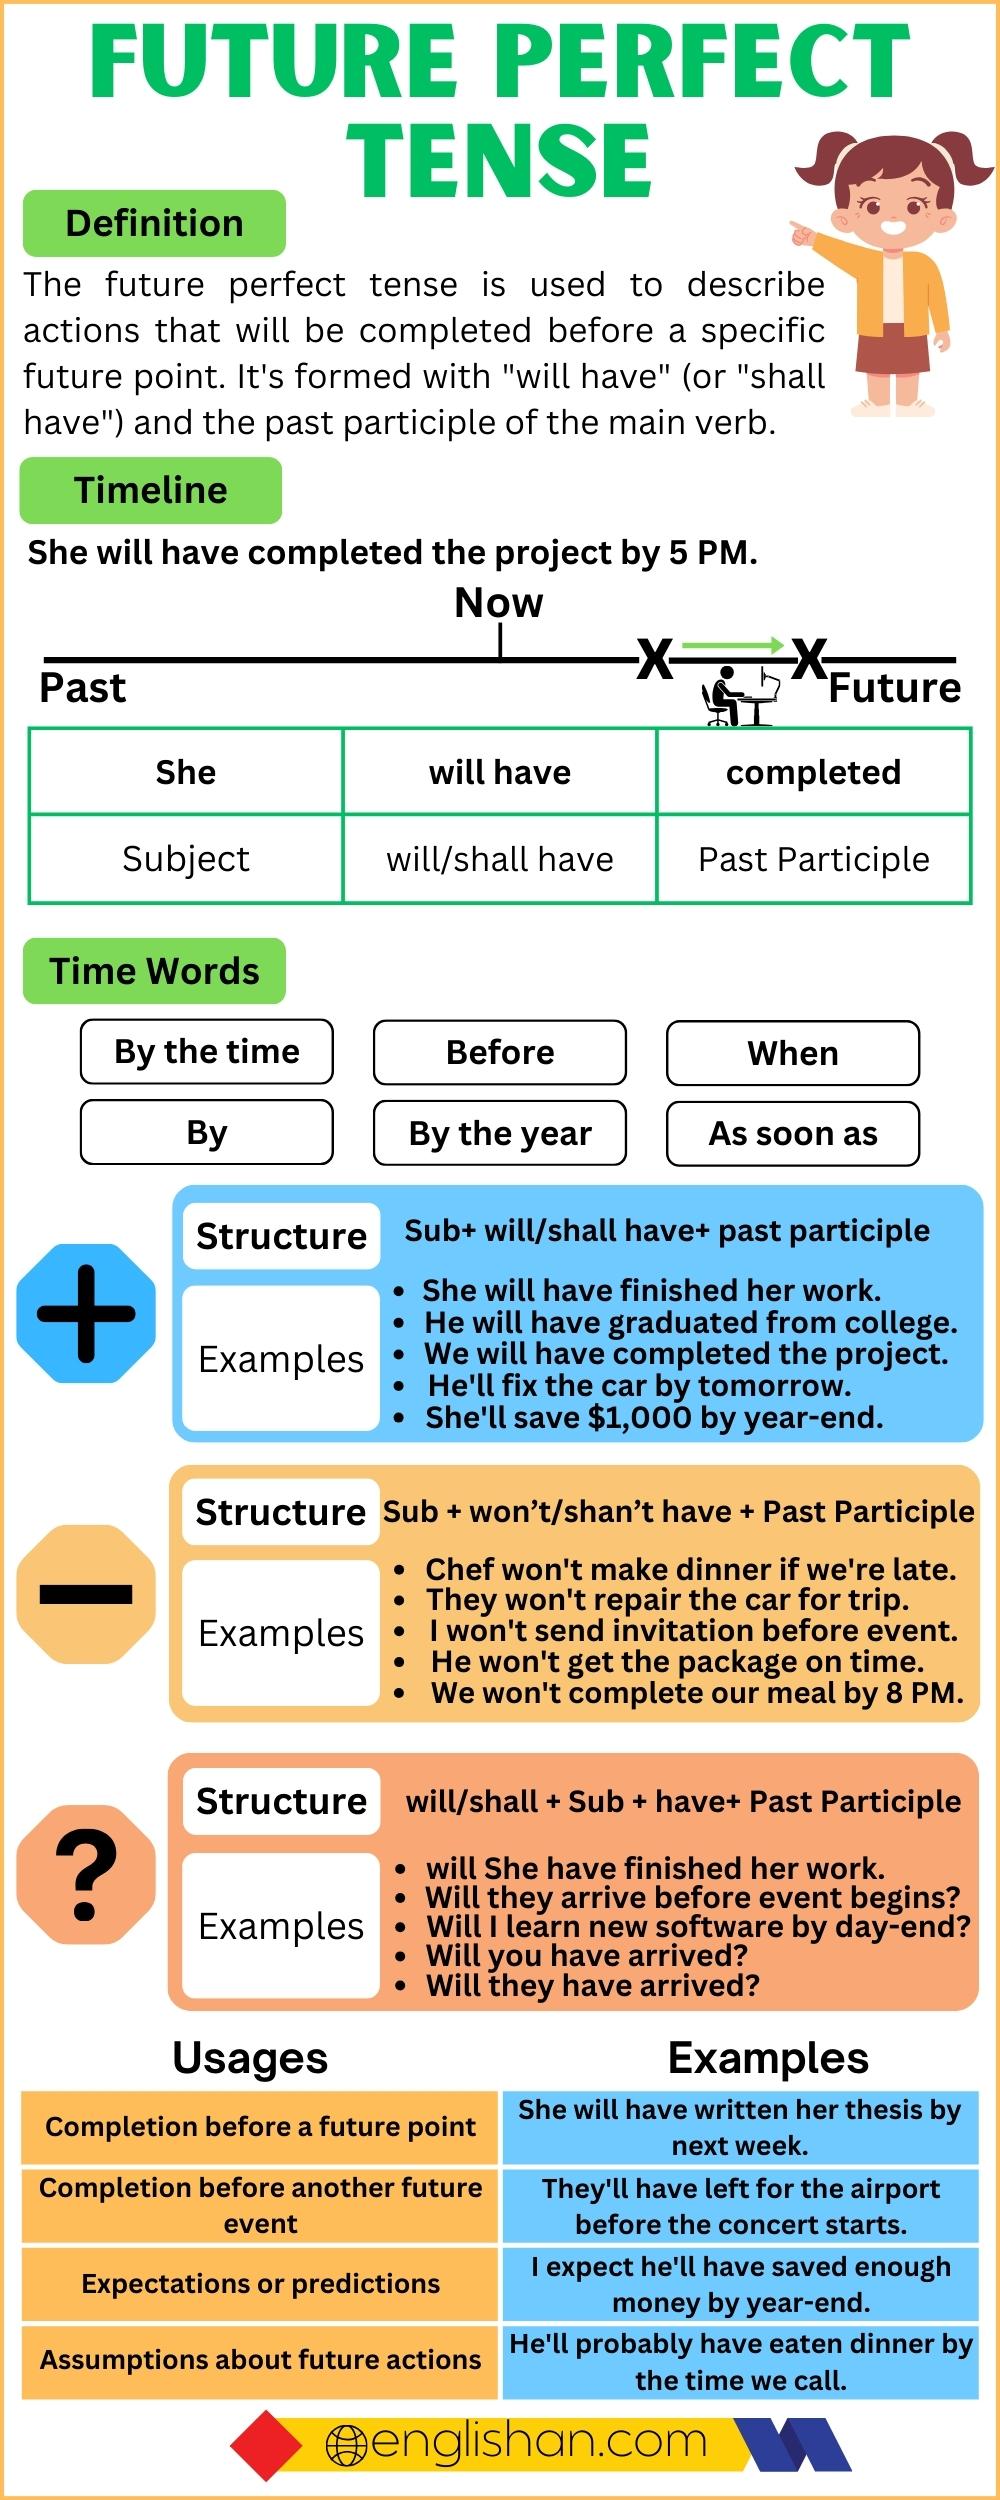 Future Perfect Tense Chart with Definition, Rules, Structure, Usages, Example Sentences